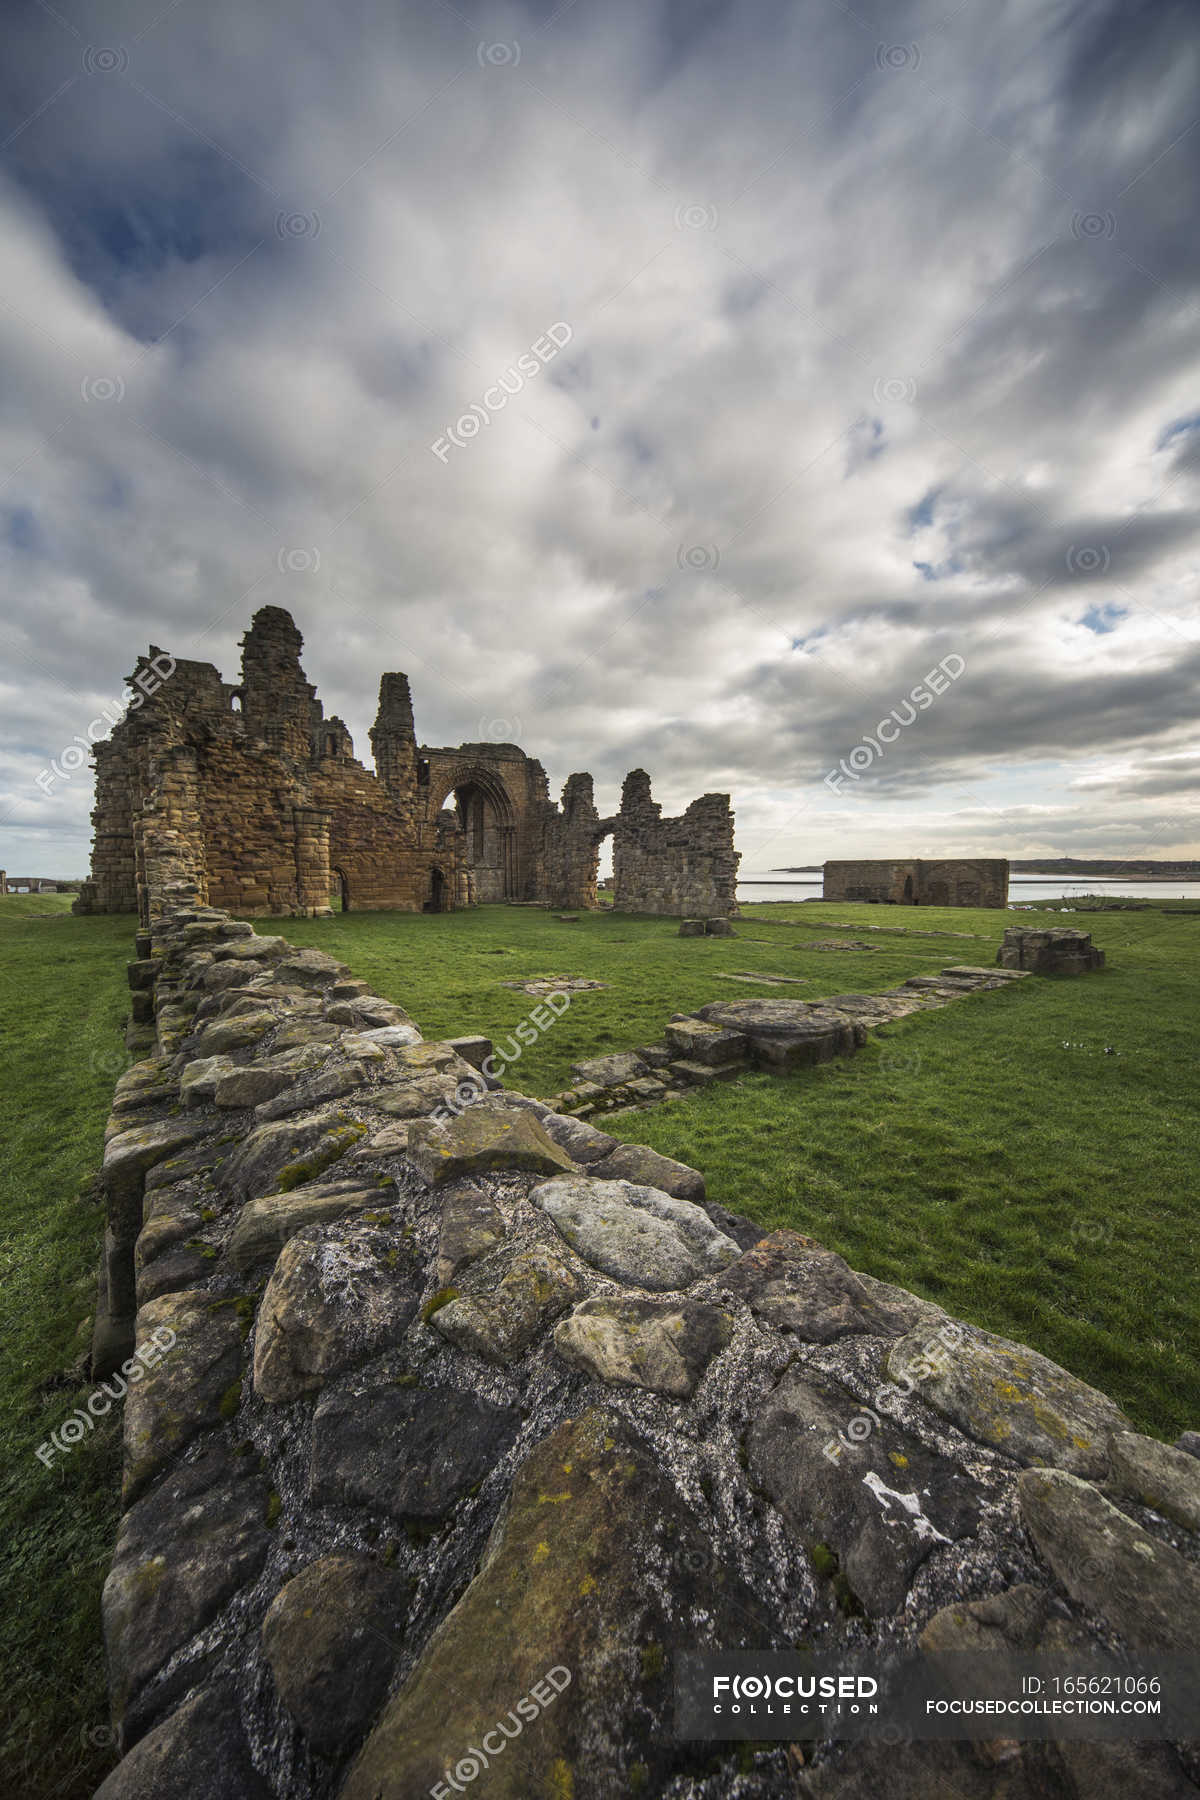 Ruined old castle — Stock Photo | #165621066